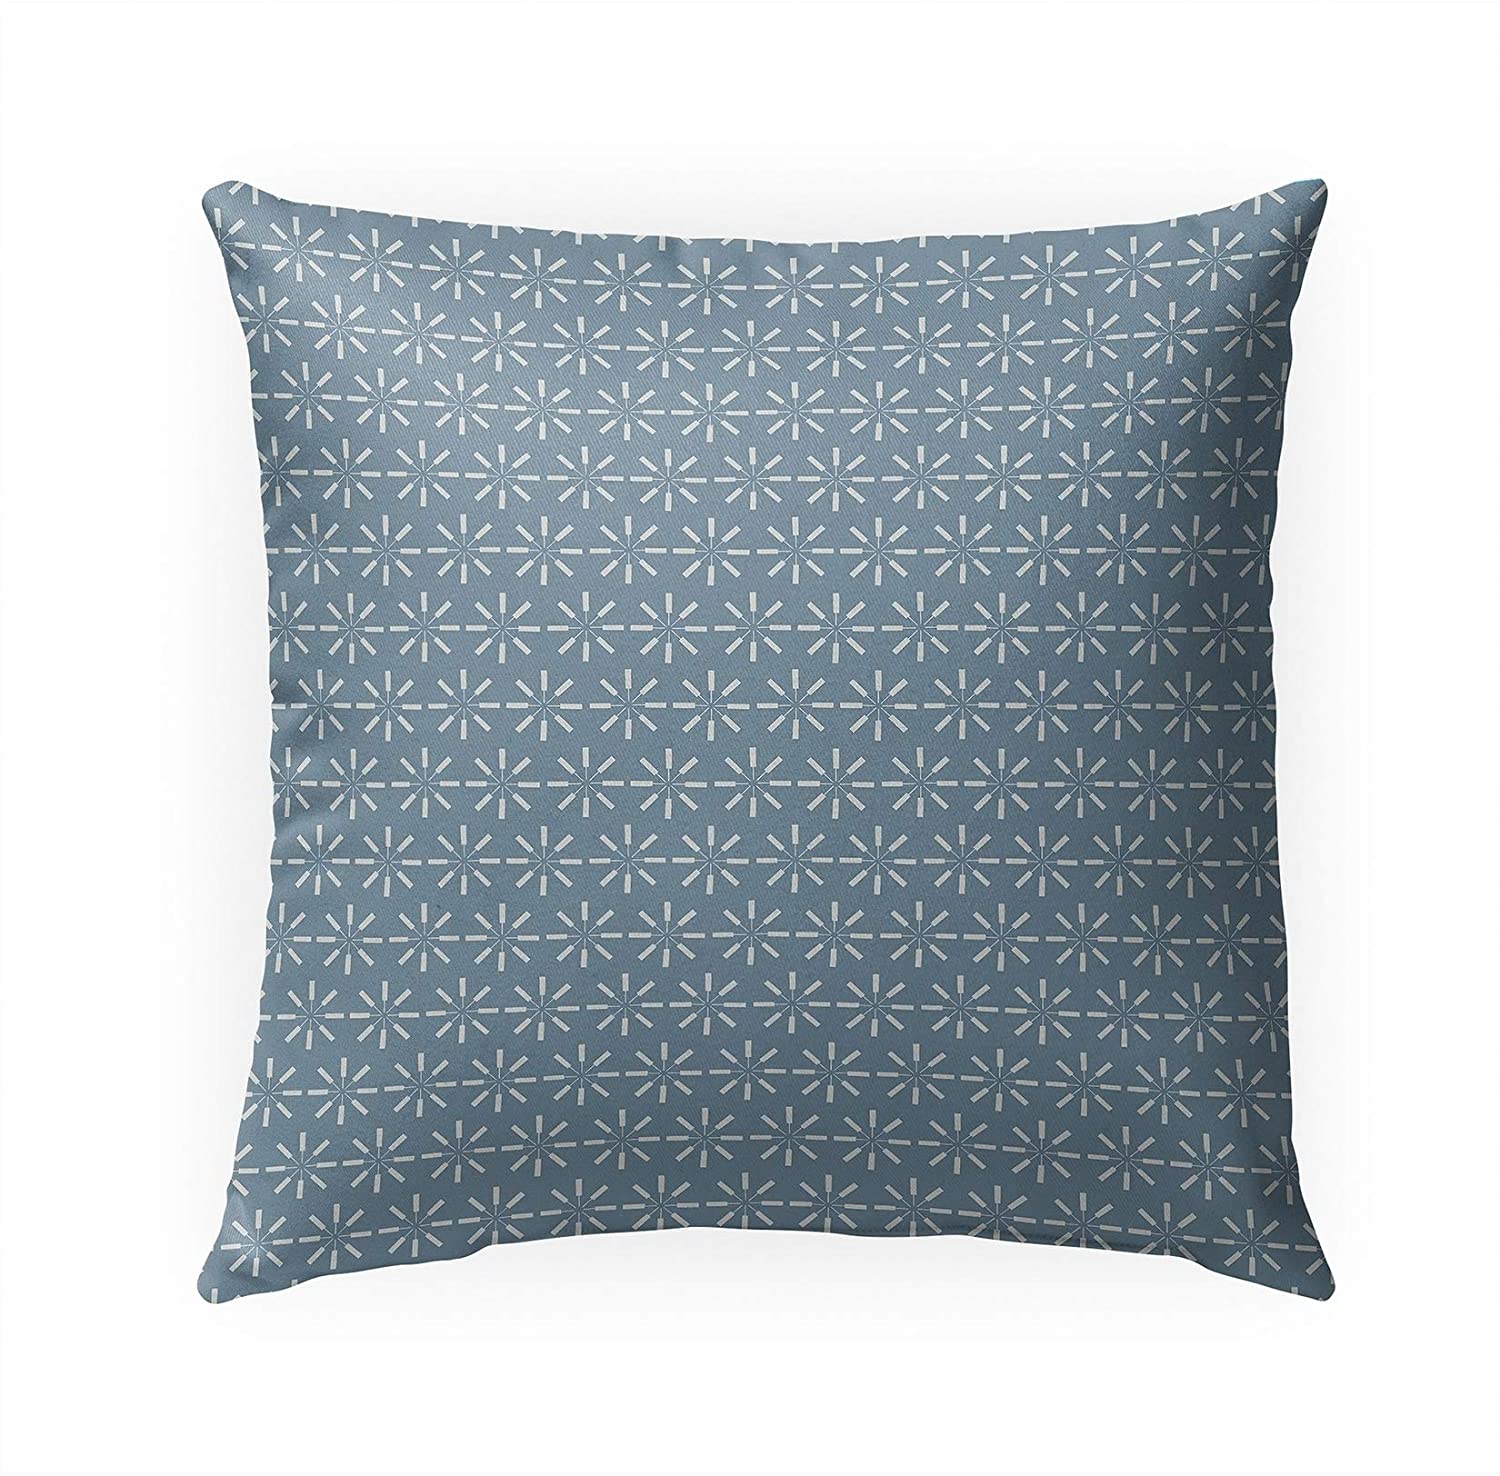 Vintage Blue Indoor|Outdoor Pillow by Tiffany 18x18 Blue Geometric Modern Contemporary Polyester Removable Cover